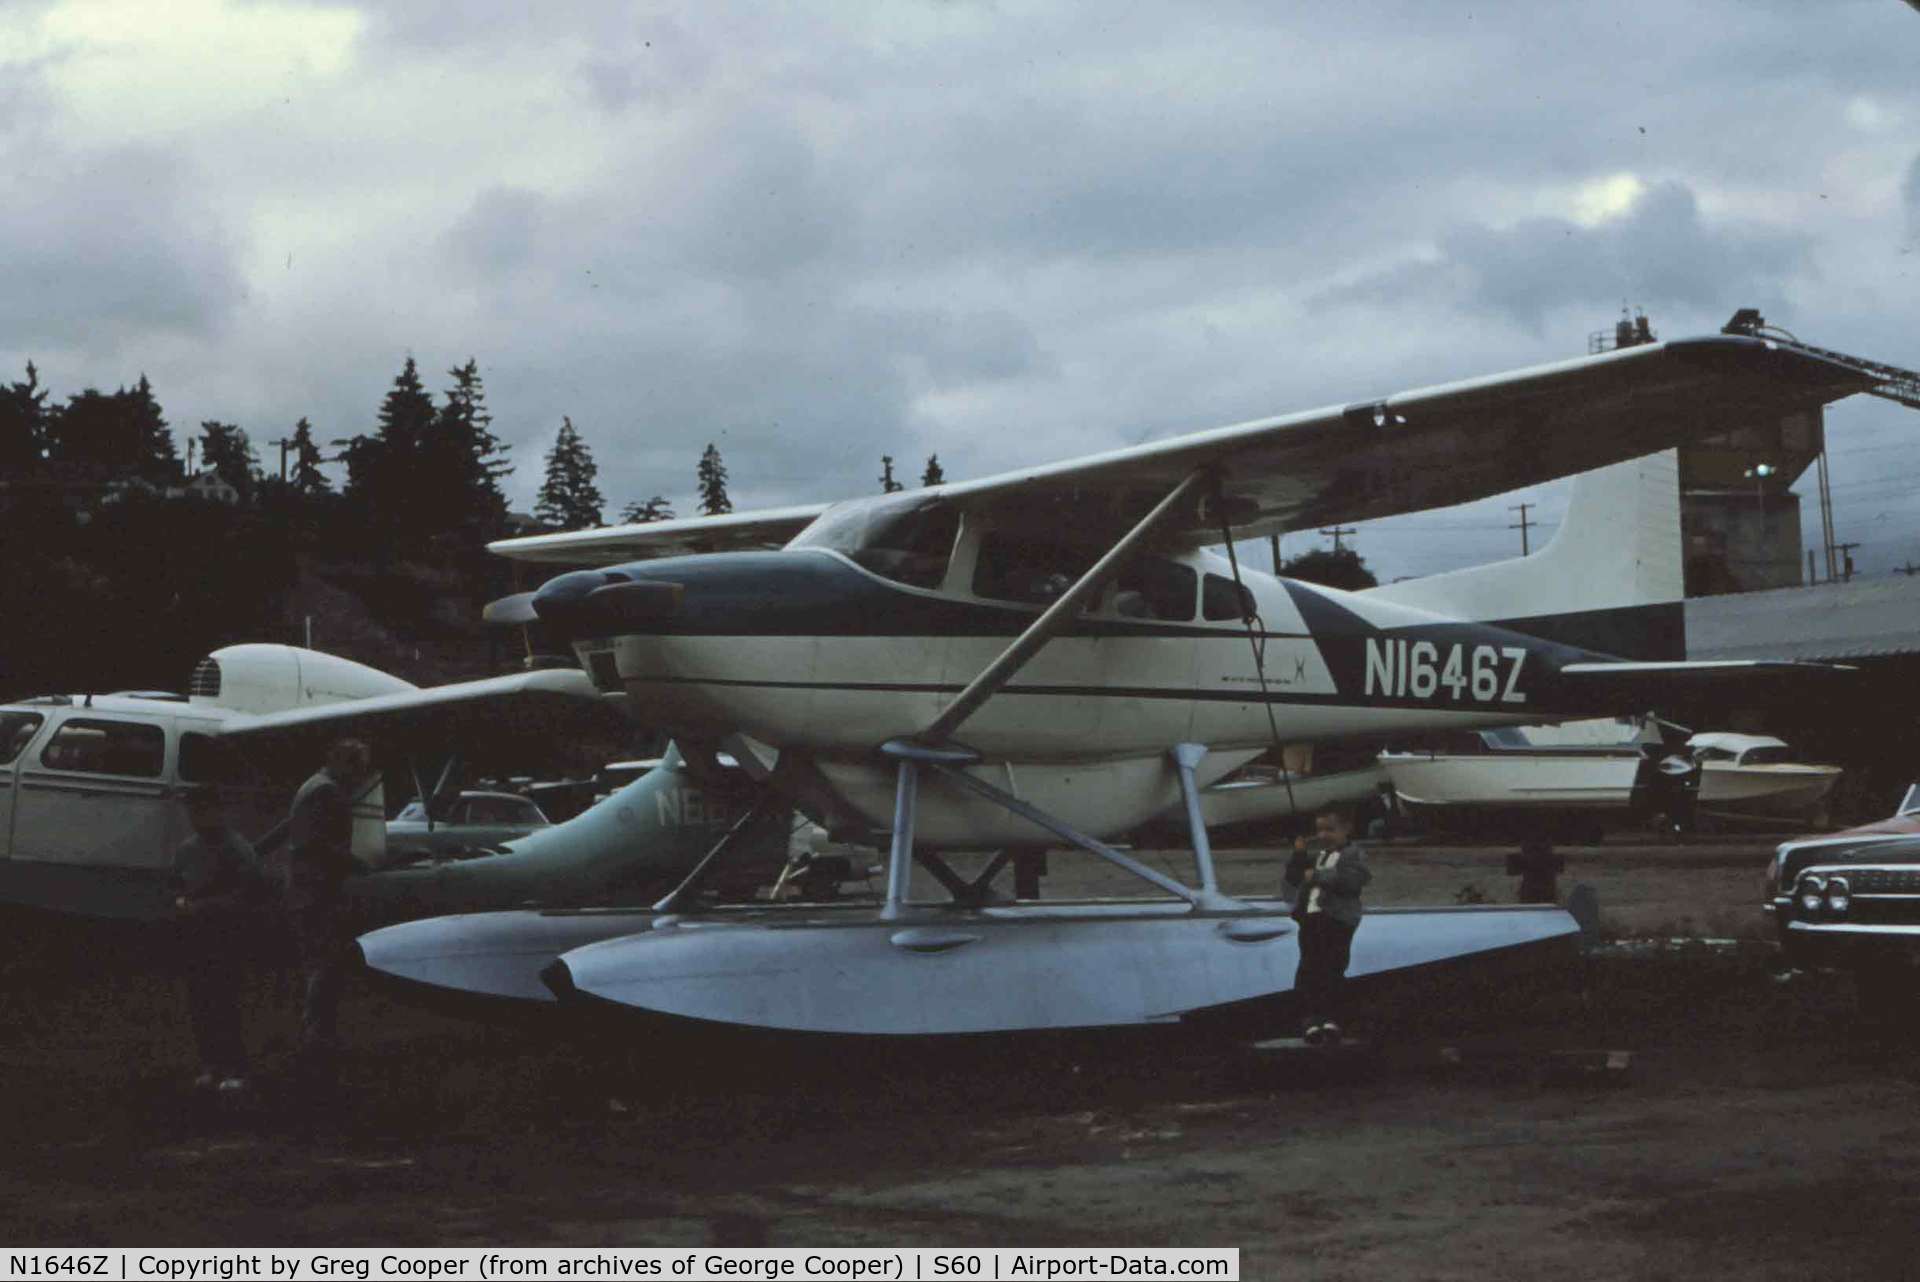 N1646Z, 1962 Cessna 185A Skywagon C/N 185-0446, At Kenmore Air Harbor 1962 on her way to Fairbanks, Alaska from Wichita, KS. Owner then was George Cooper, Fairbanks, AK.